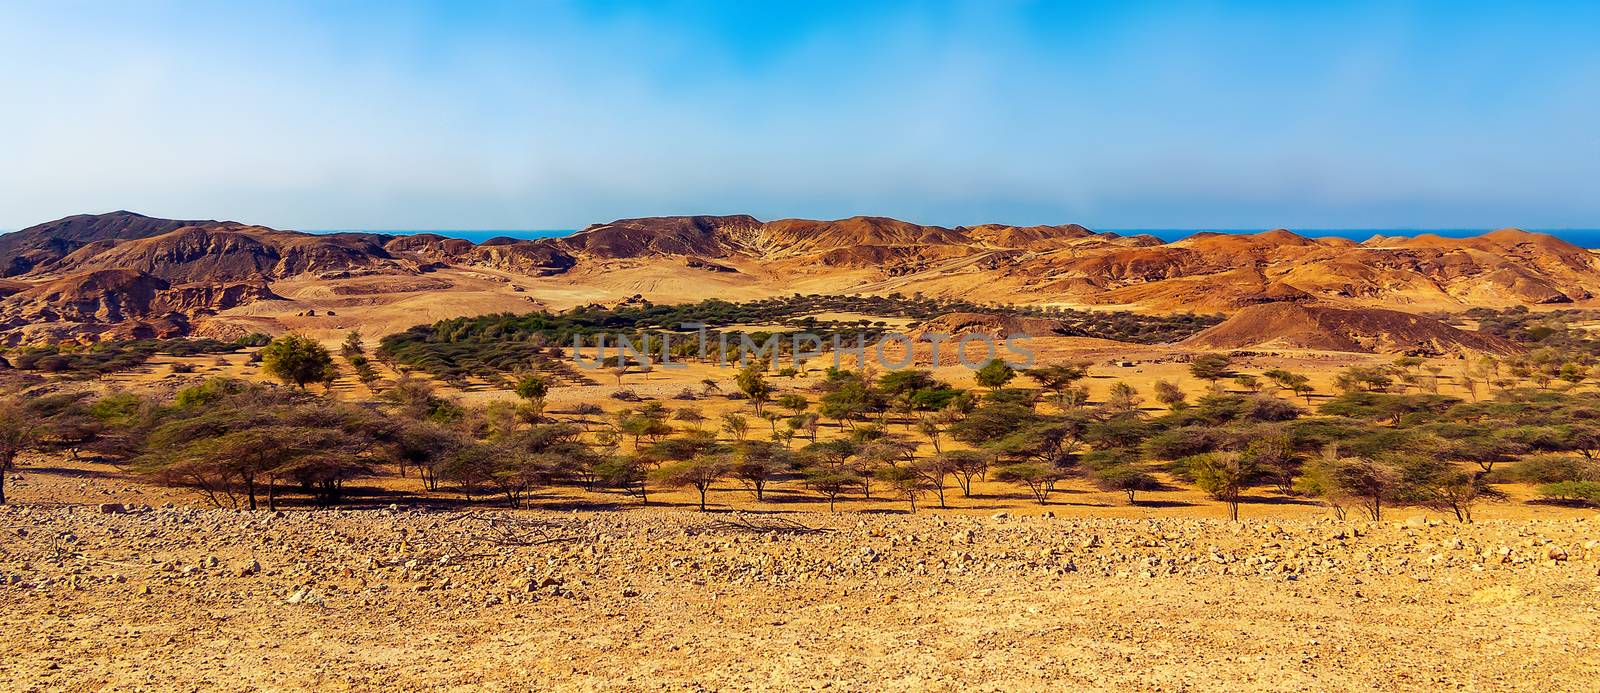 Panoramic view of the Salt Dome in the national park on the island of Sir Bani Yas, Abu Dhabi, United Arab Emirates by galsand